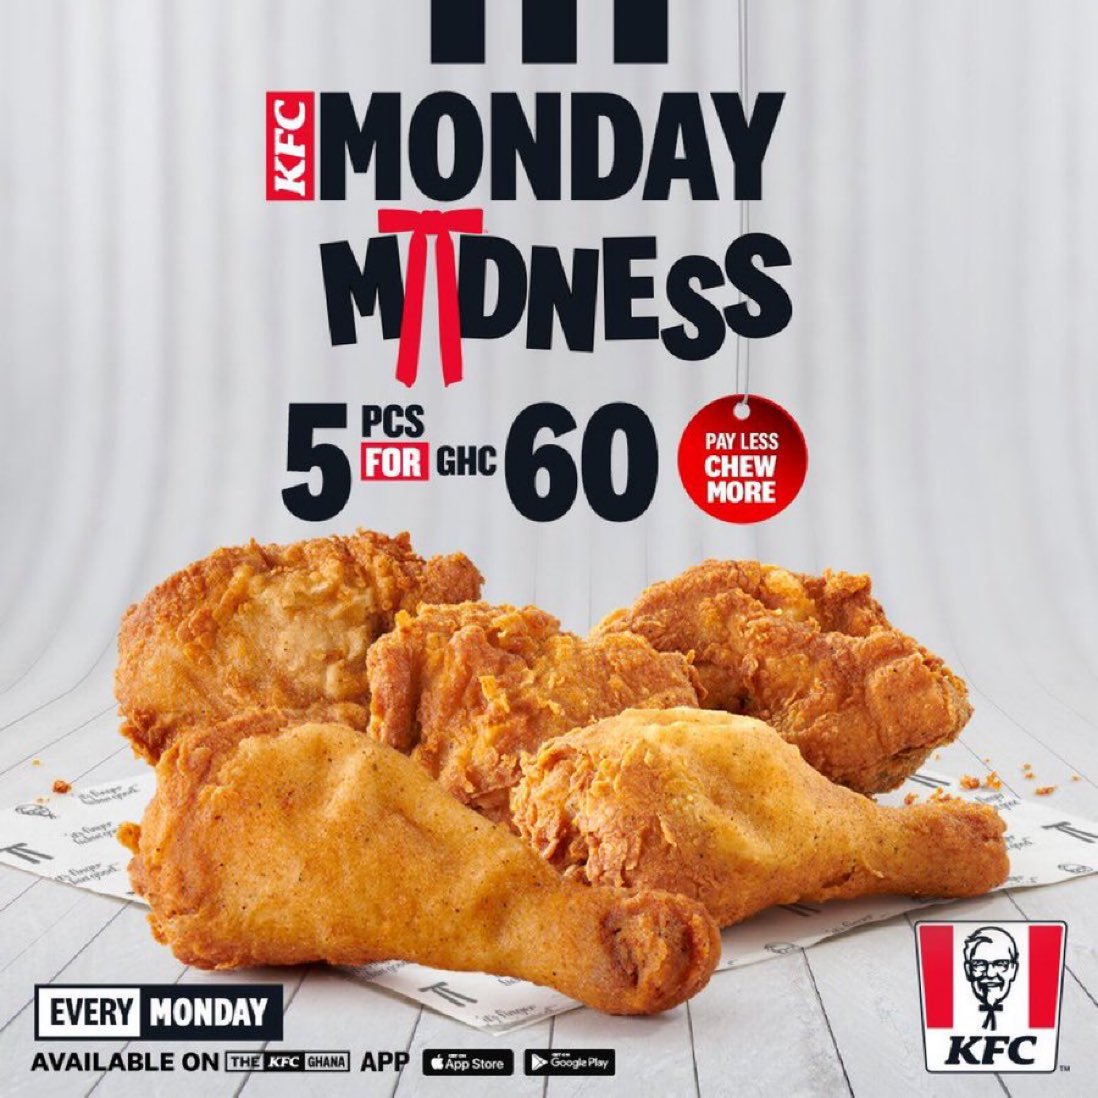 5 pieces of chicken for only ghc60, it's only available on Monday from 10am. Pay less chew more #KFCMondayMadness